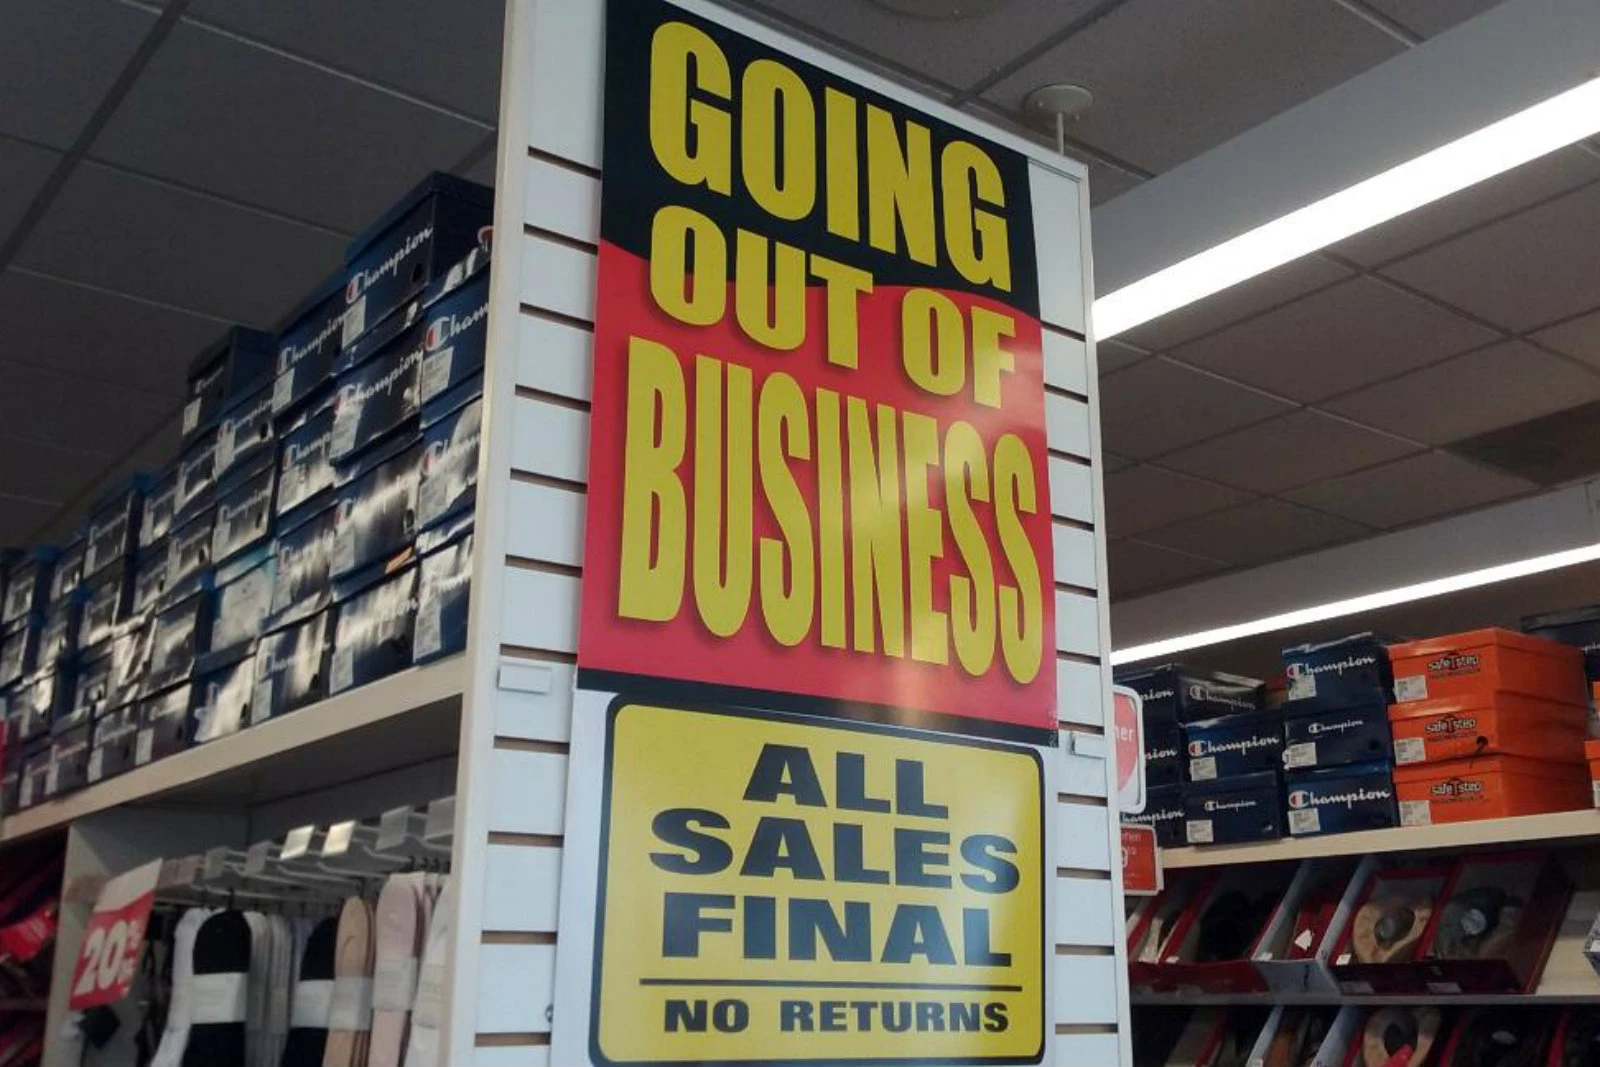 payless to close all stores